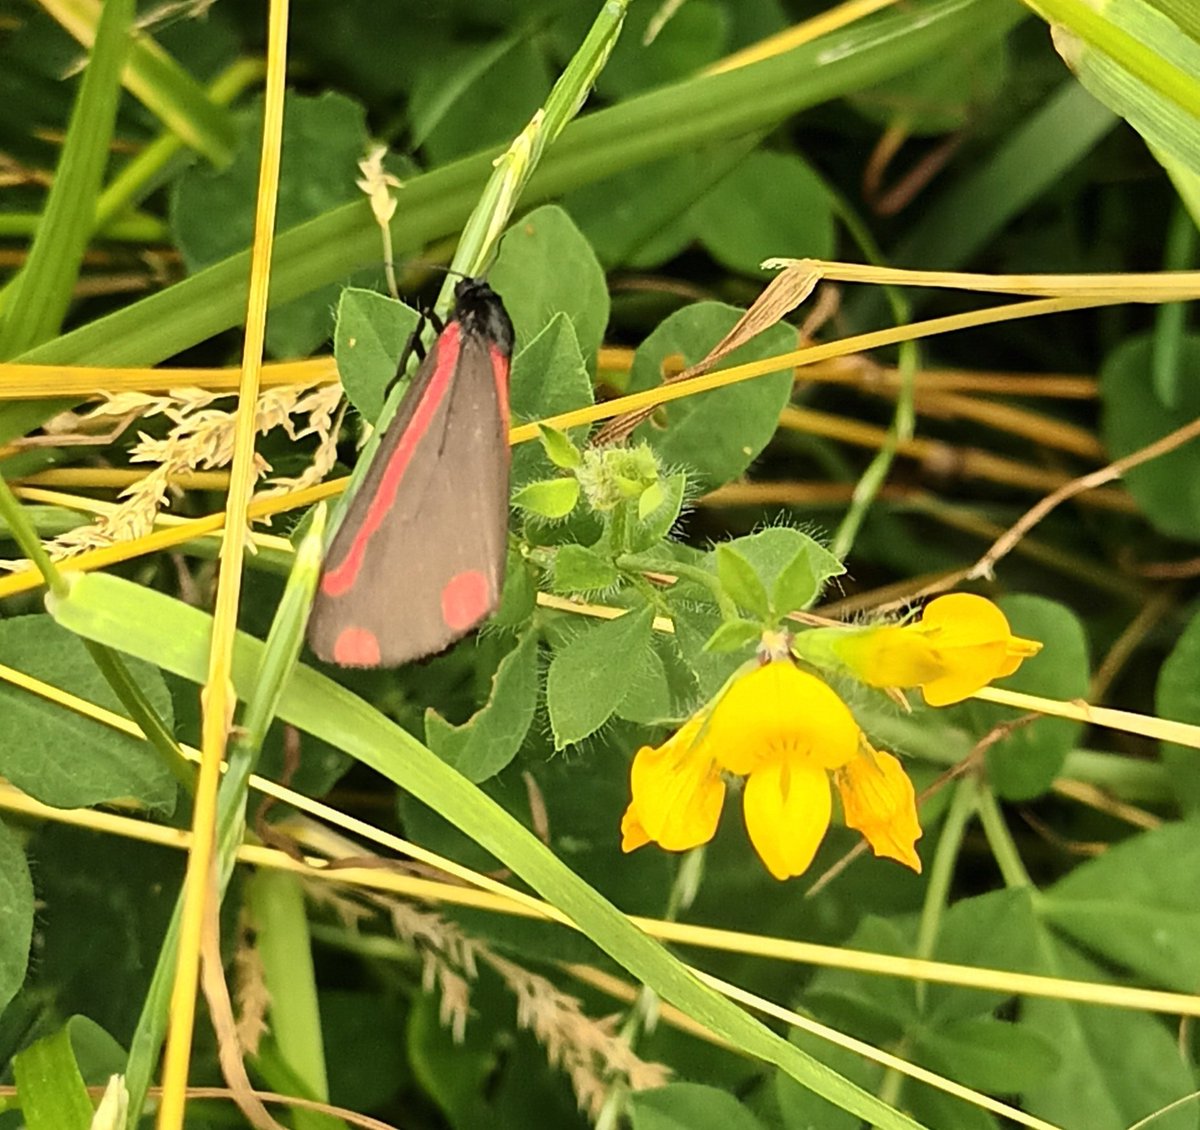 Excitement this morning with a Cinnabar Moth in my lawn meadow, very close to my Ragwort. Will there soon be orange and black stripy beauties all over it? #garden #cinnabarmoth